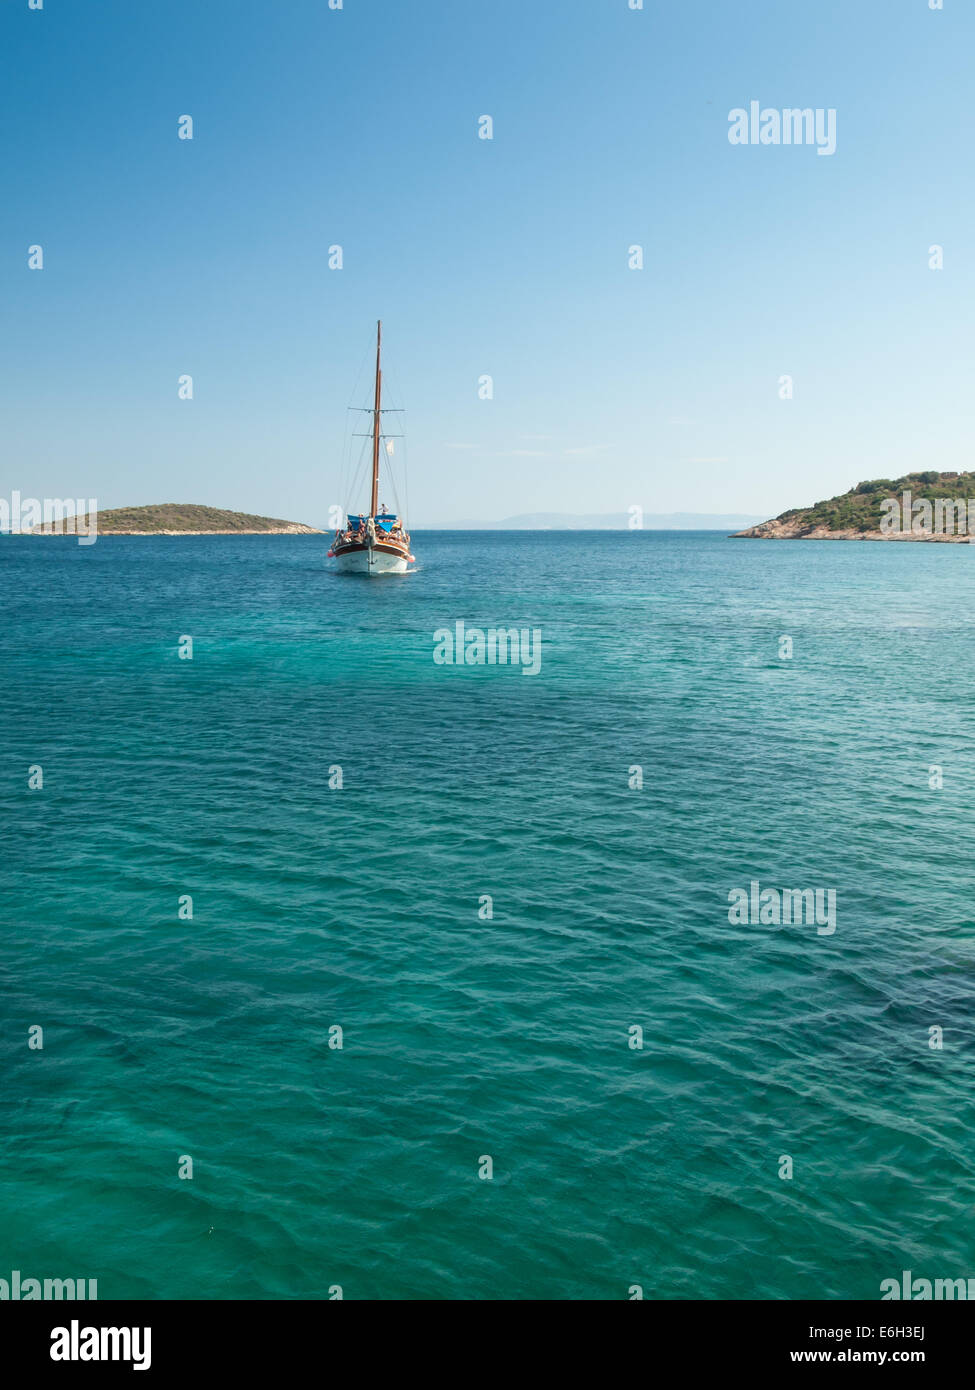 sailing boat passing between islands on the blue green waters of the turkish aegean coast. Stock Photo